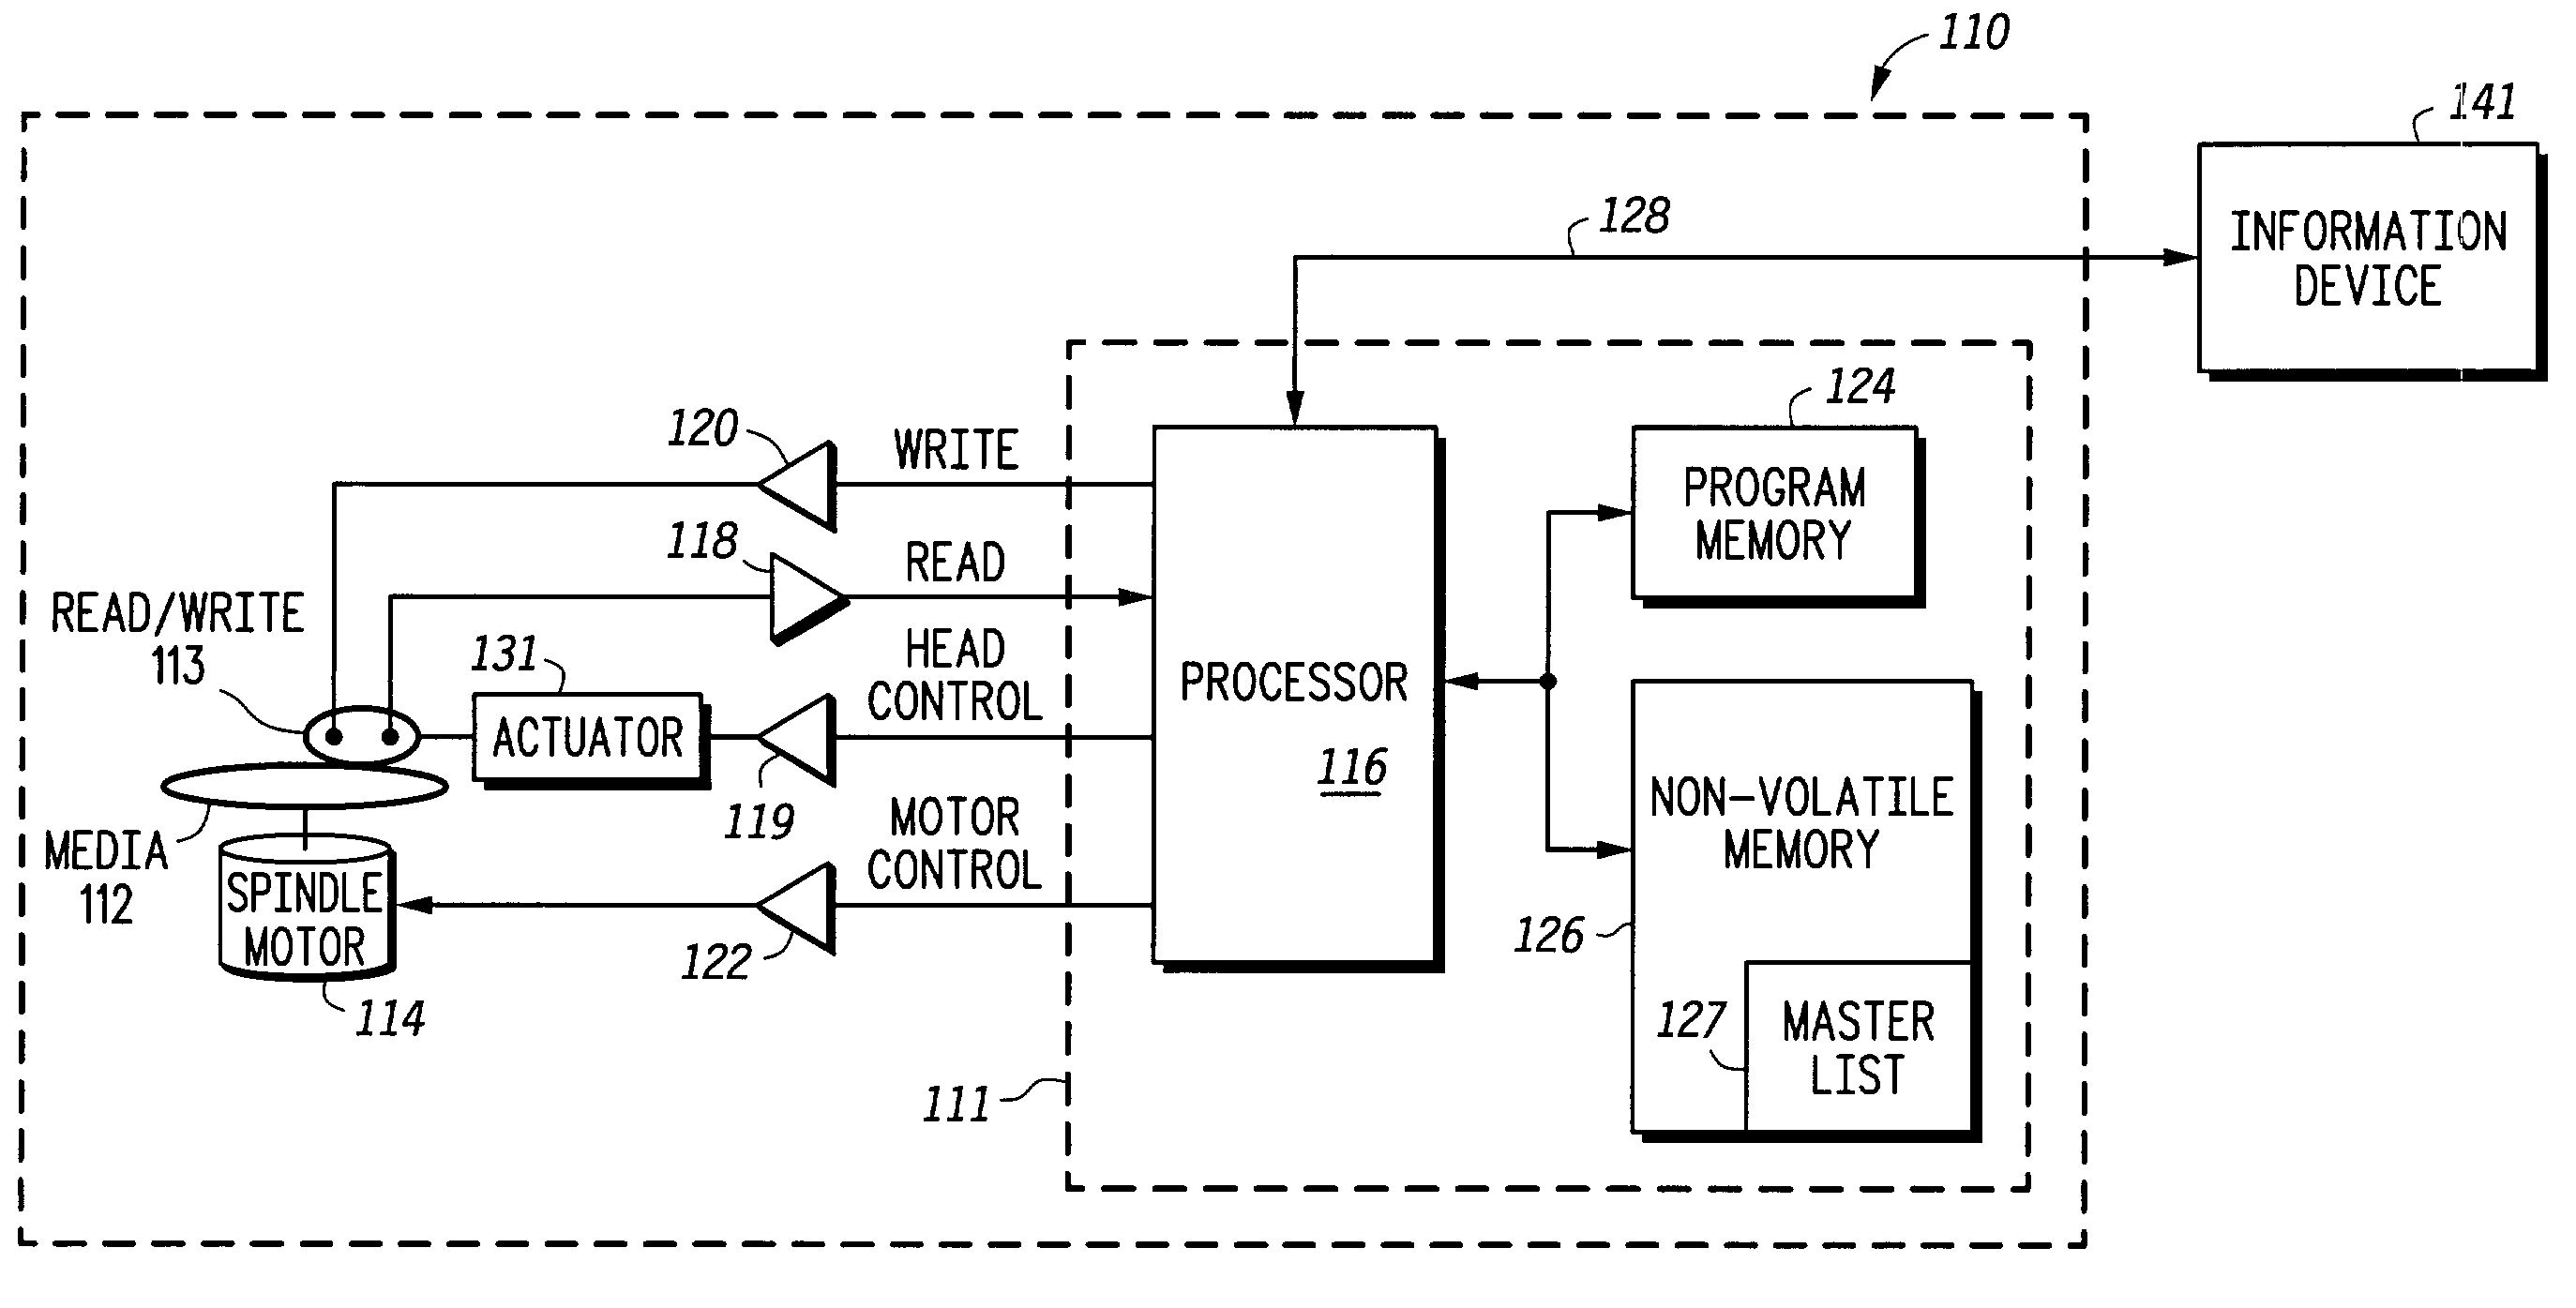 Data storage system having a non-volatile IC based memory for storing user data